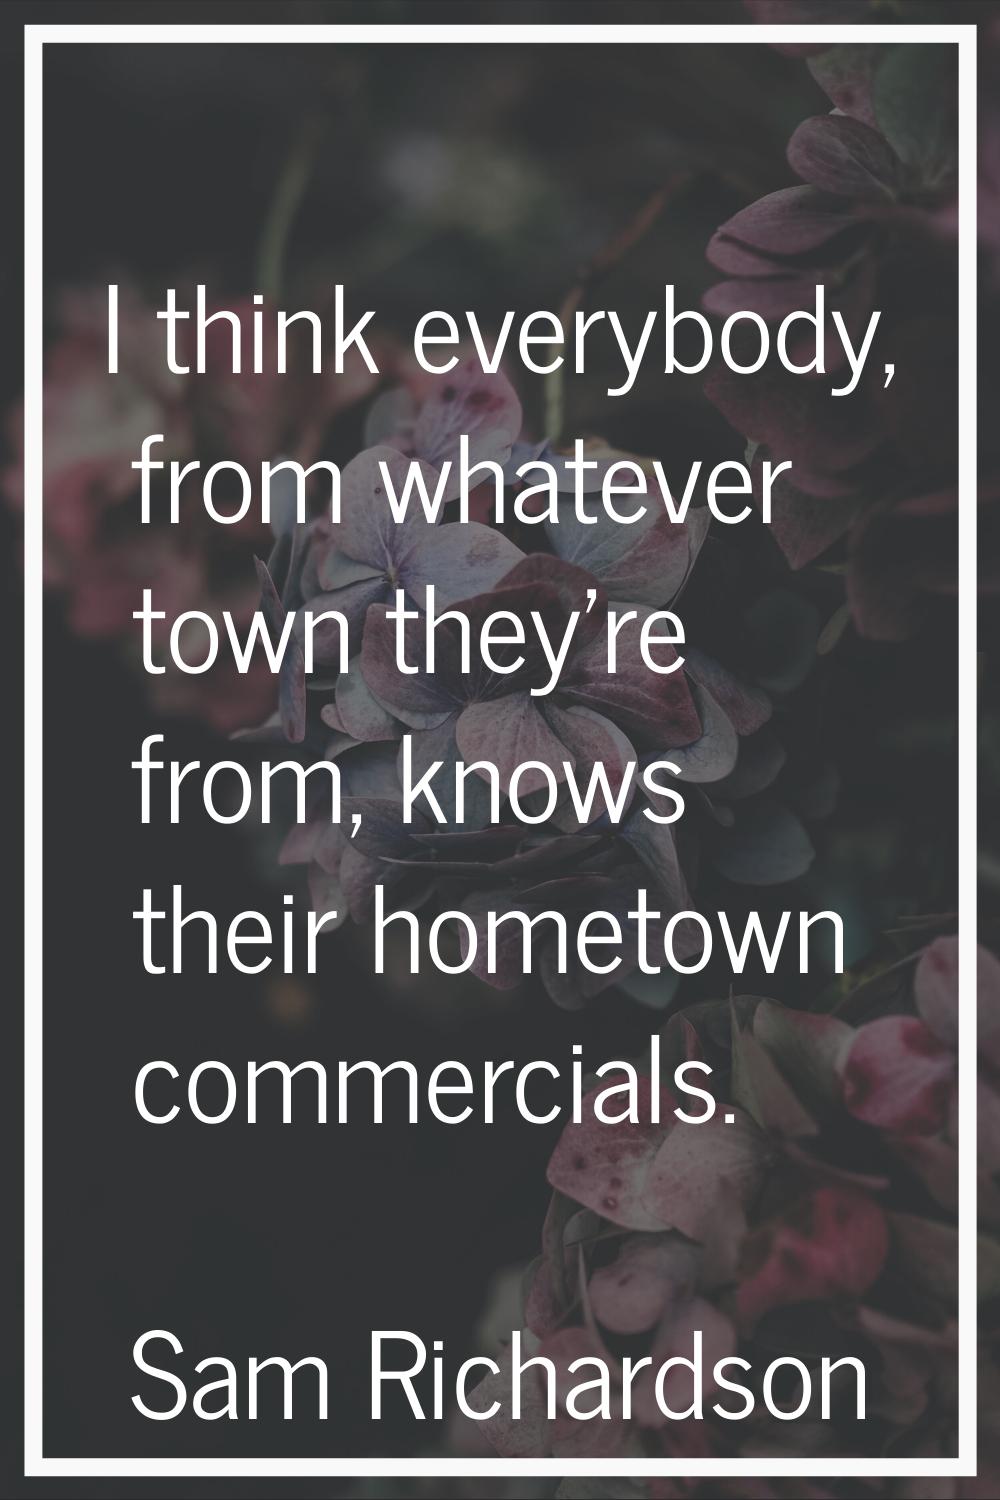 I think everybody, from whatever town they're from, knows their hometown commercials.